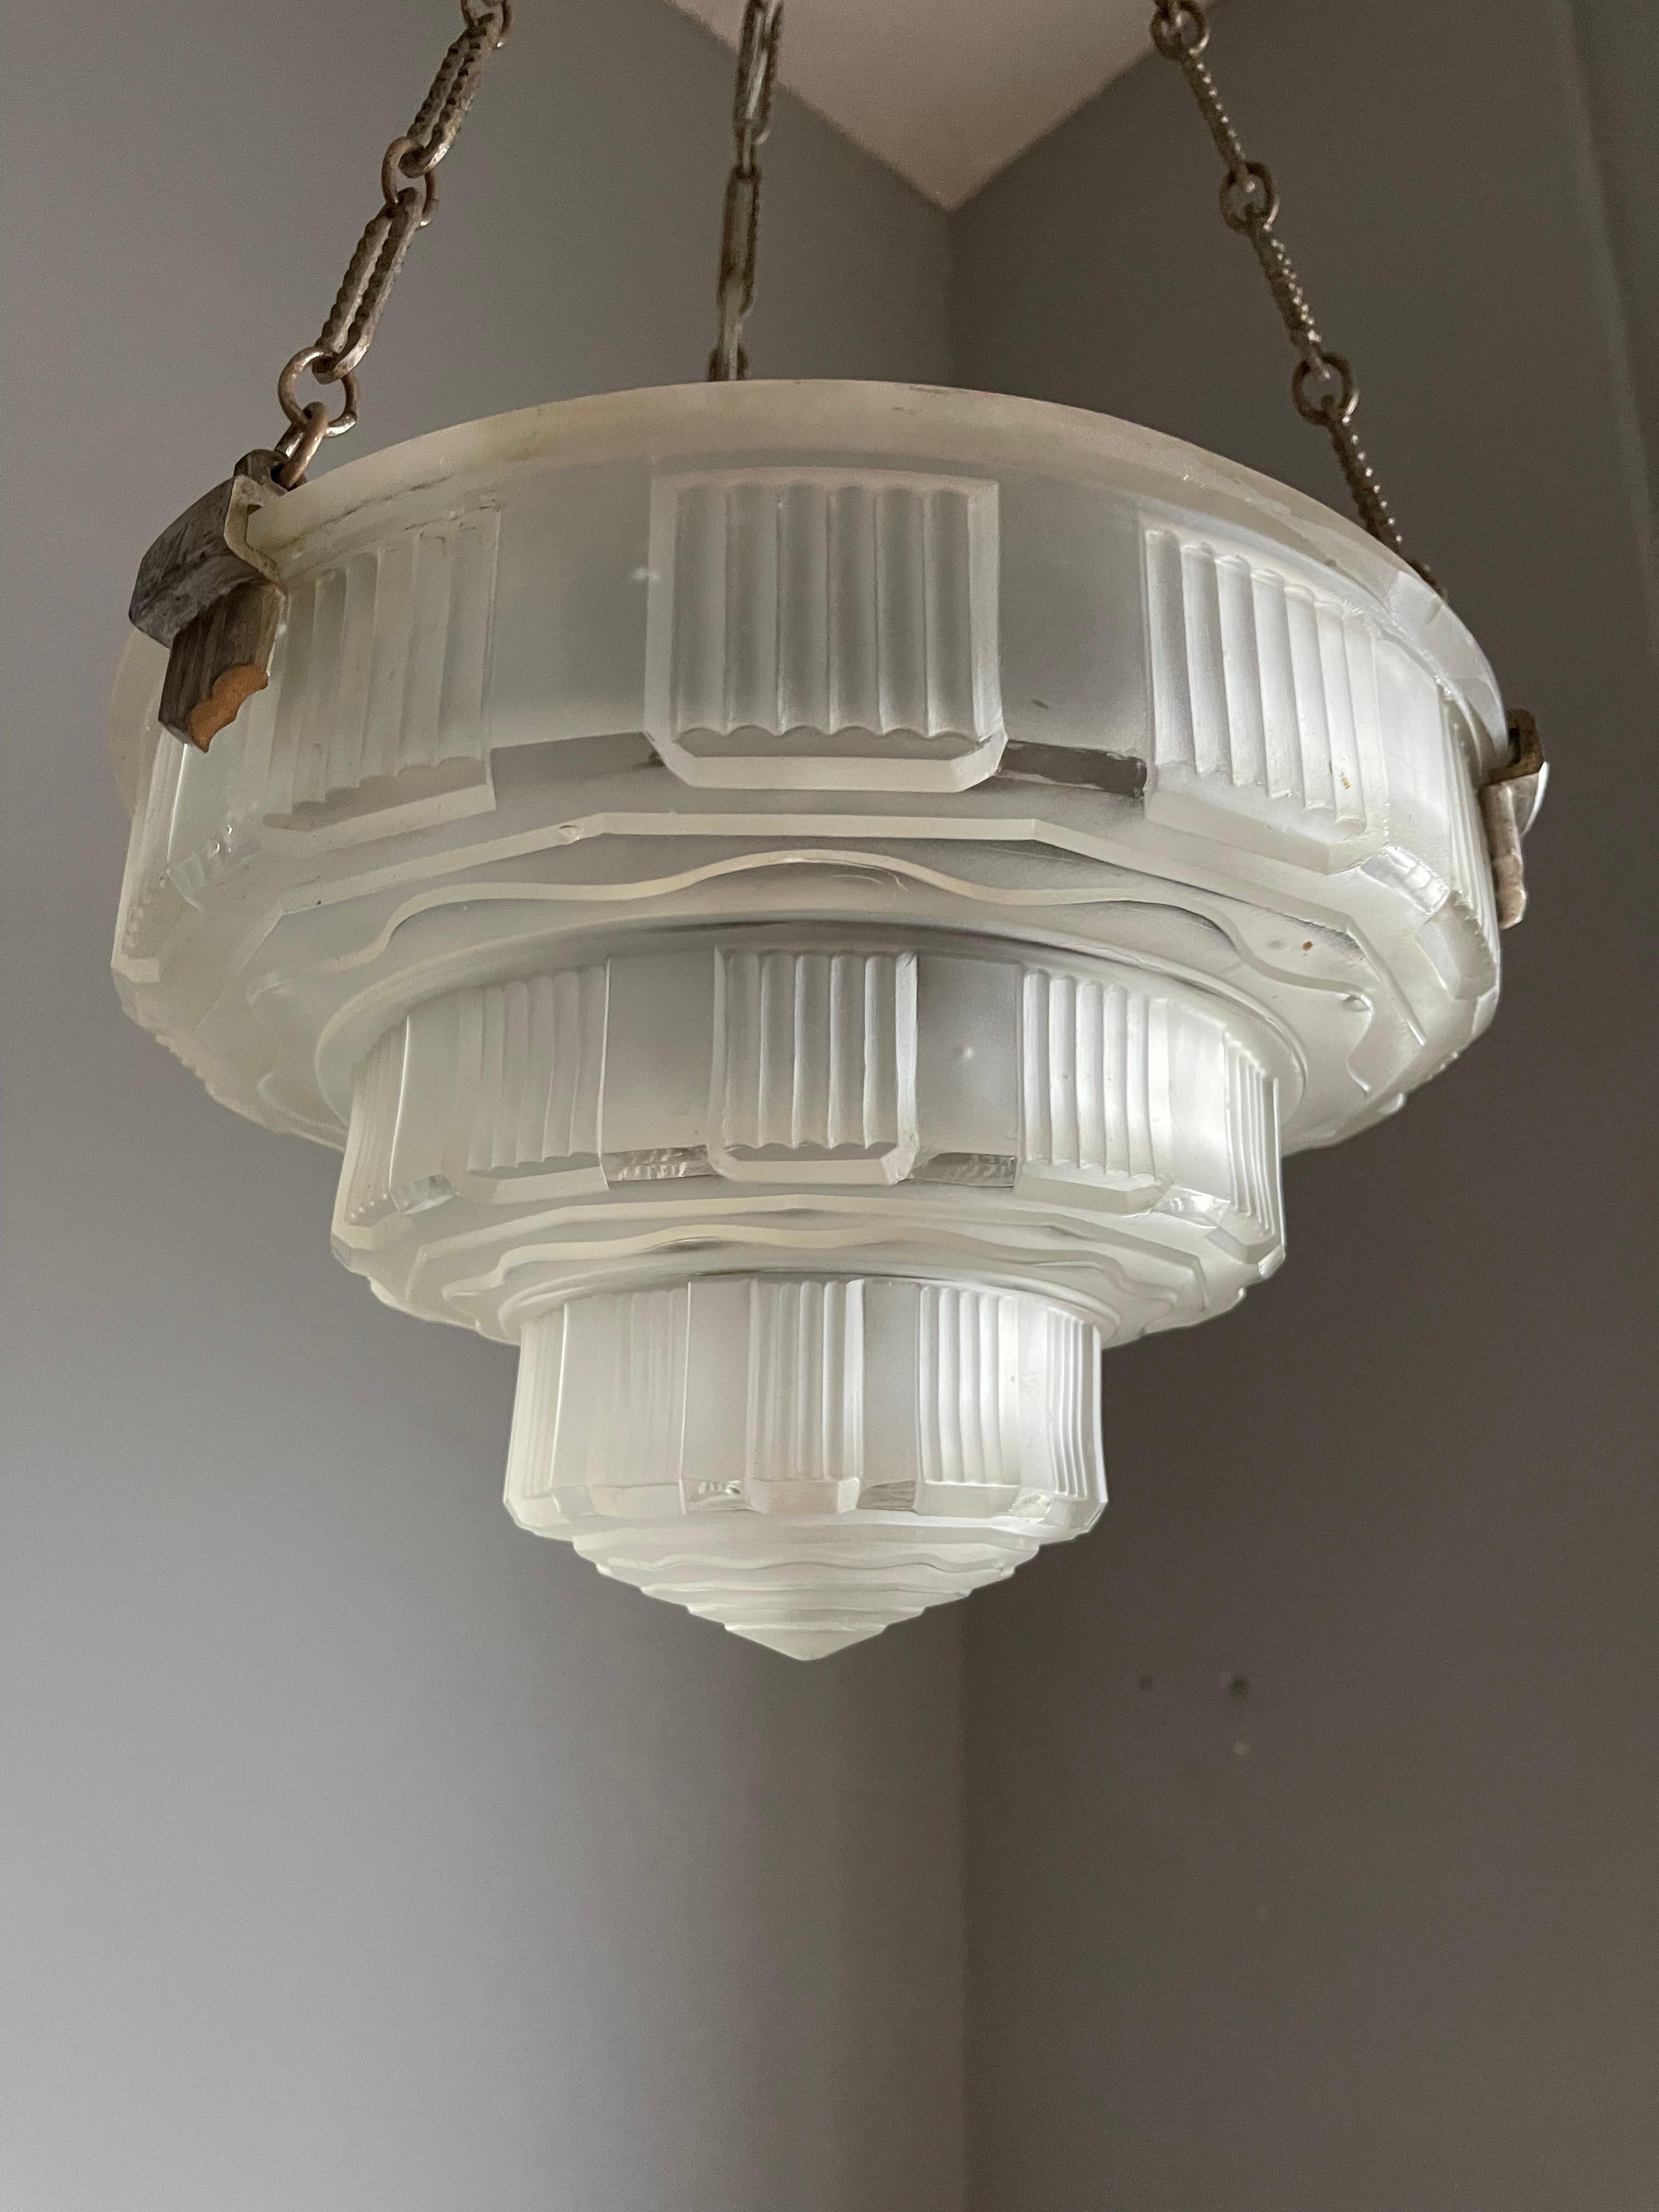 Hand-Crafted Antique & Stunning French Art Deco, Nickel Plated / Pressed Glass Pendant Light